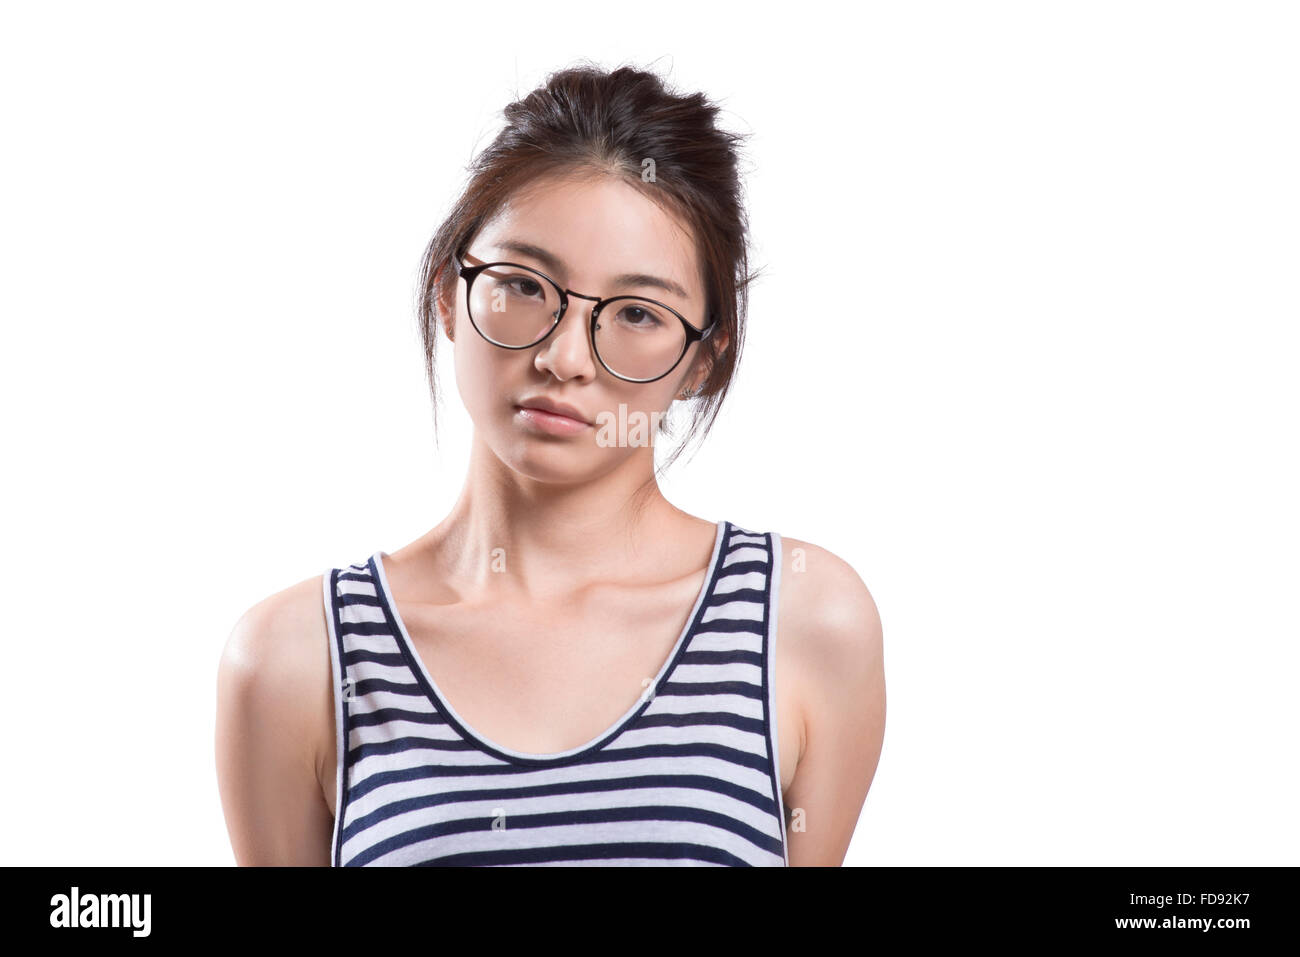 Portrait of young woman depressed Stock Photo